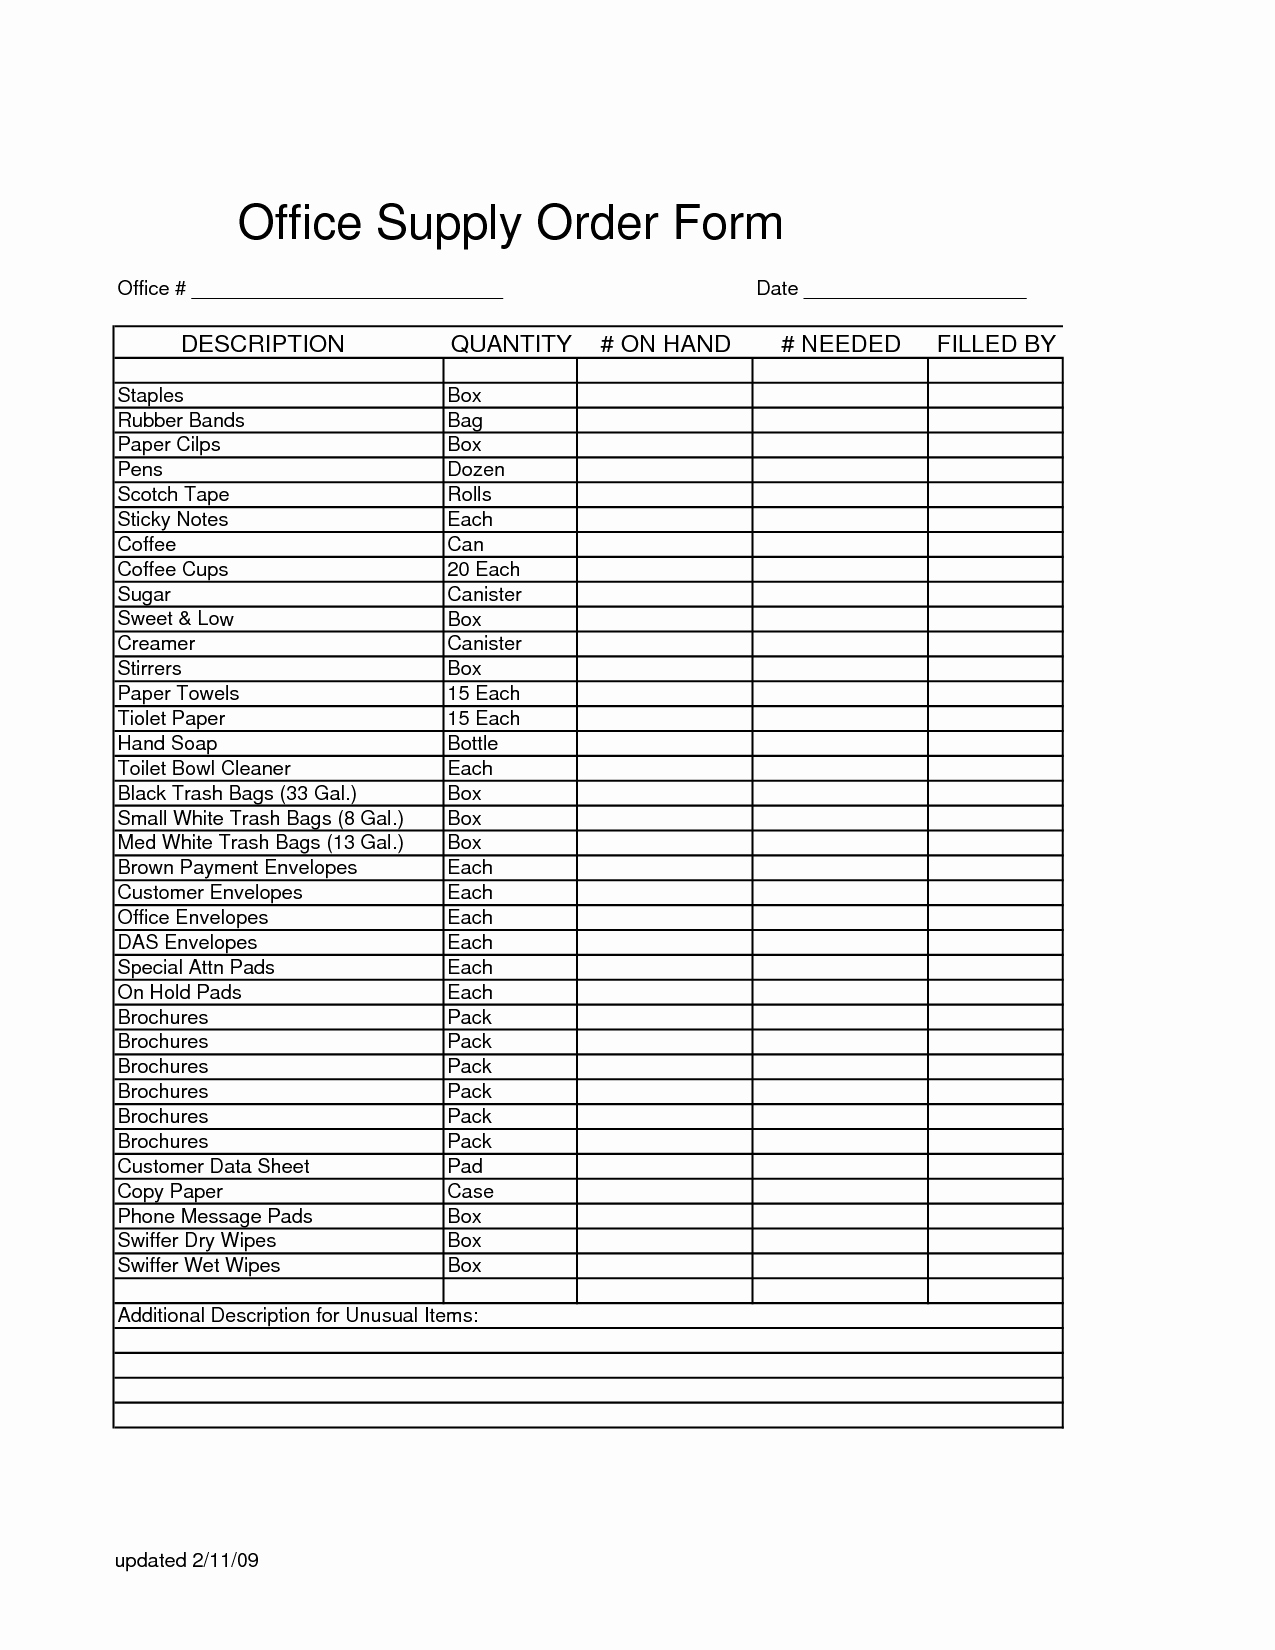 Office Supply Checklist Template Excel Fresh Fice Supply order form Template